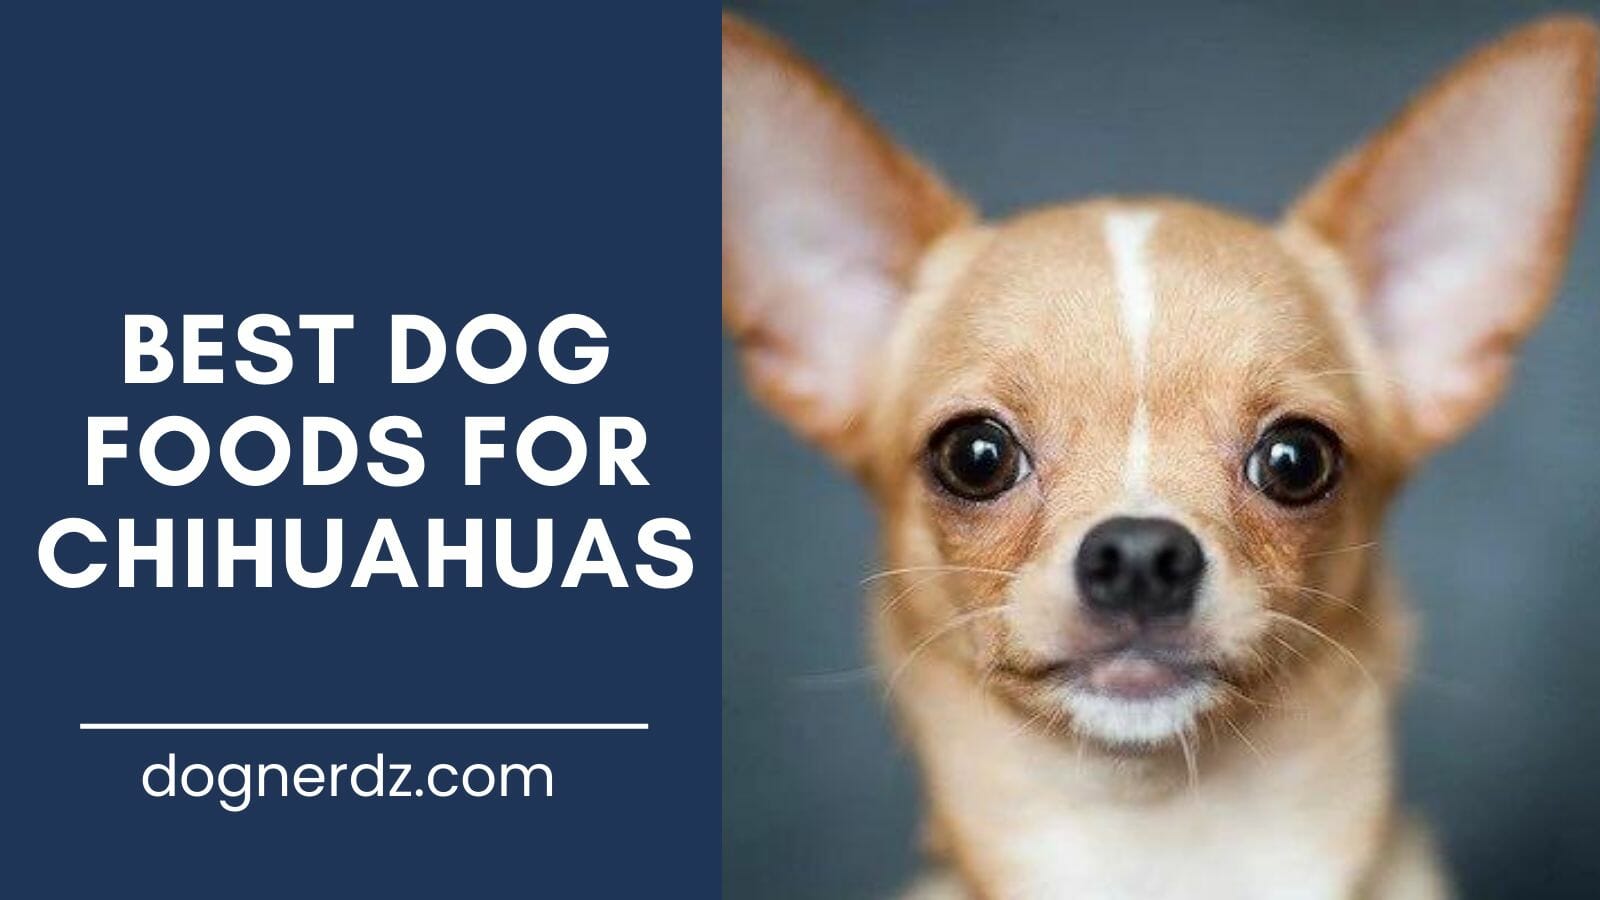 review of the best dog foods for chihuahuas